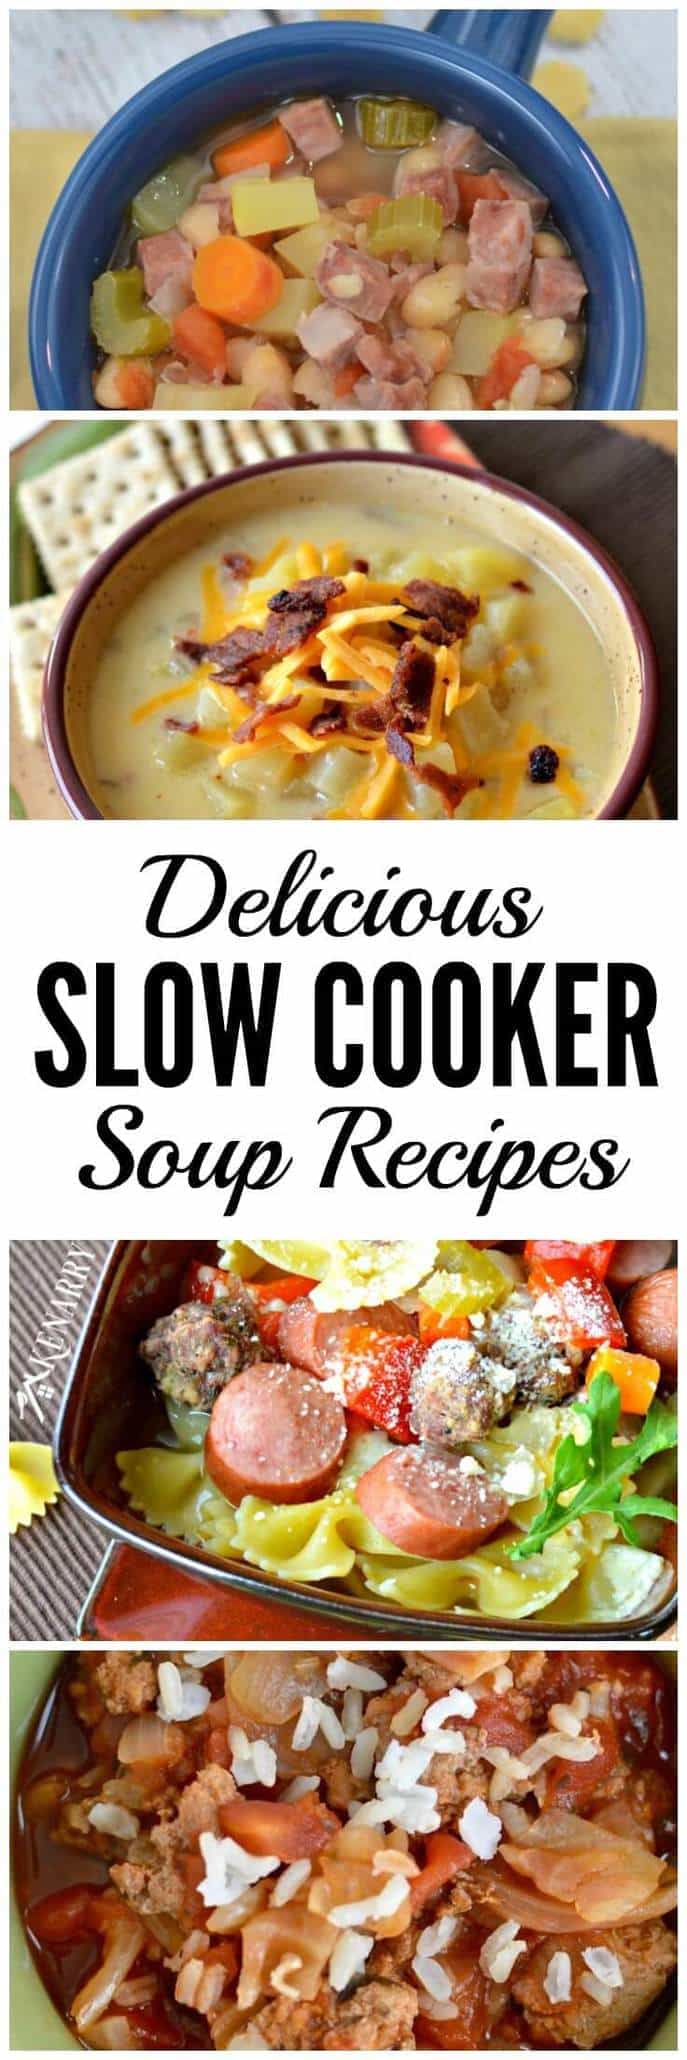 These Slow Cooker Soup Recipes are sure to become a family favorite dinner! You're going to love these recipe ideas for White Bean and Ham Soup, Cabbage Roll Soup, Sausage and Meatball Soup and Loaded Potato Soup.